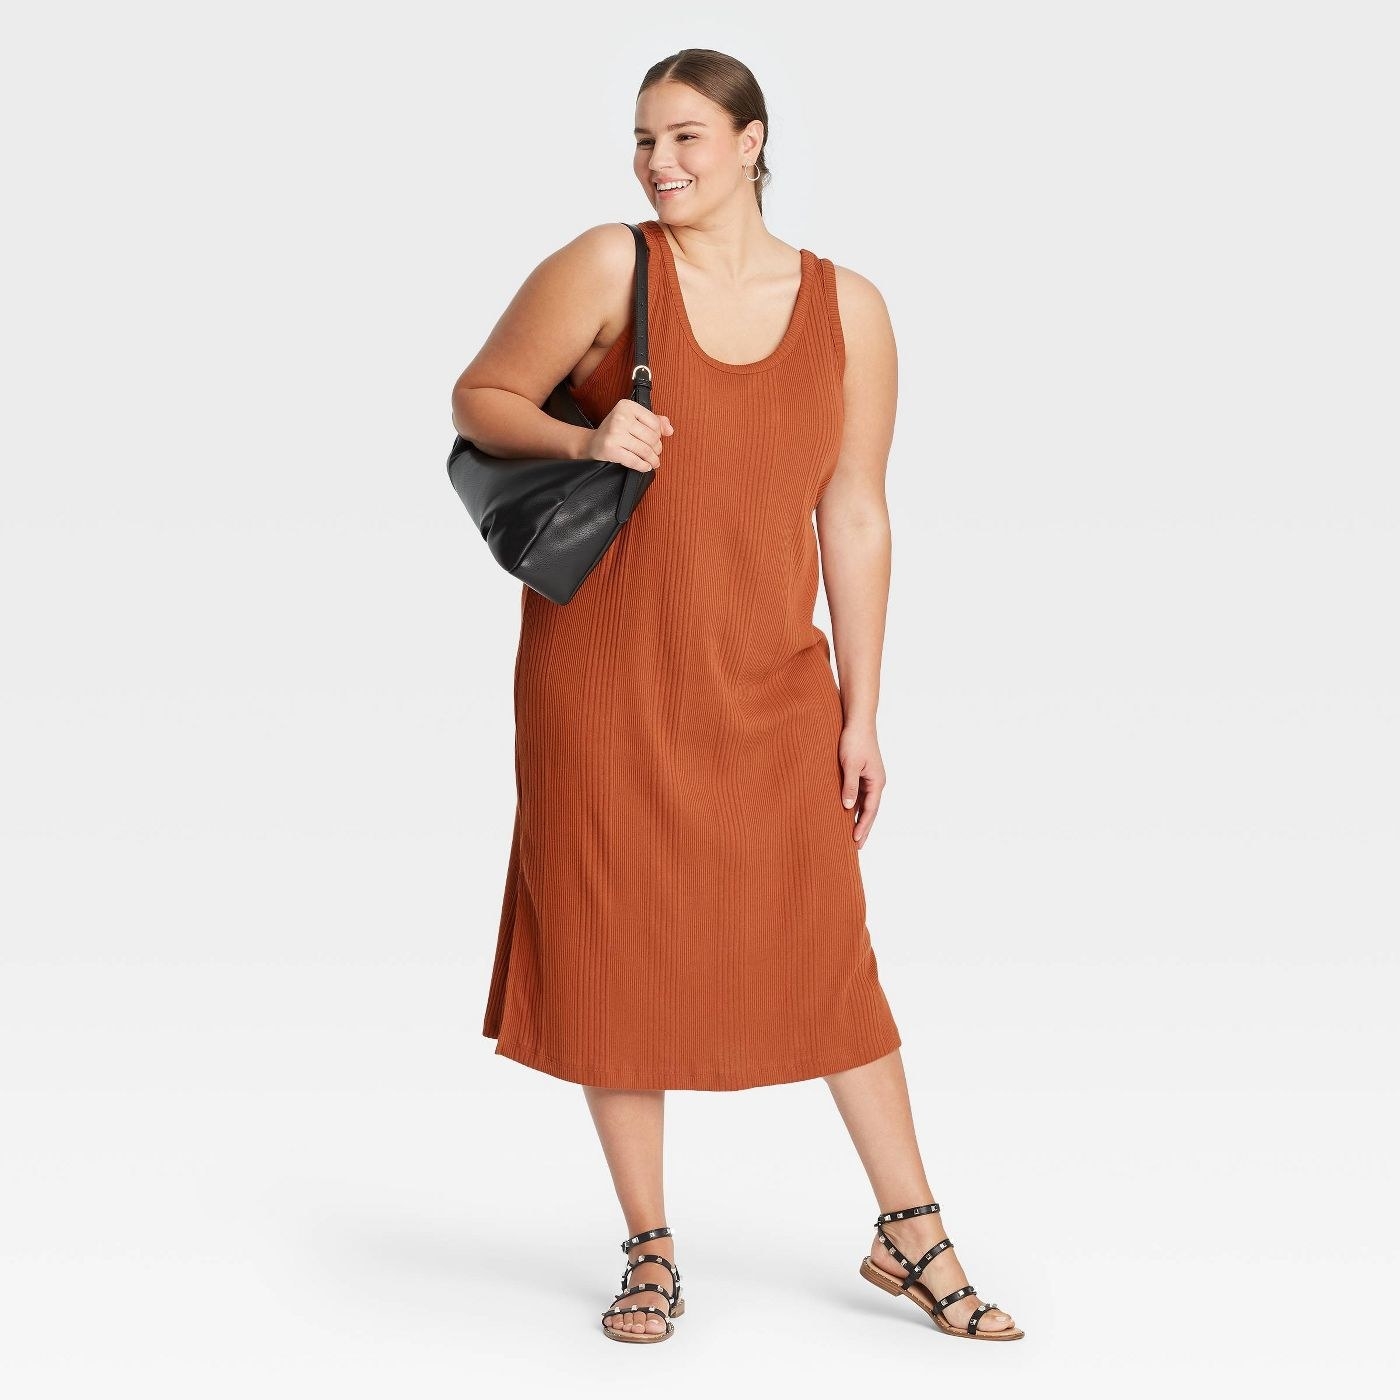 Model wearing rust color dress with large bag and black shoes